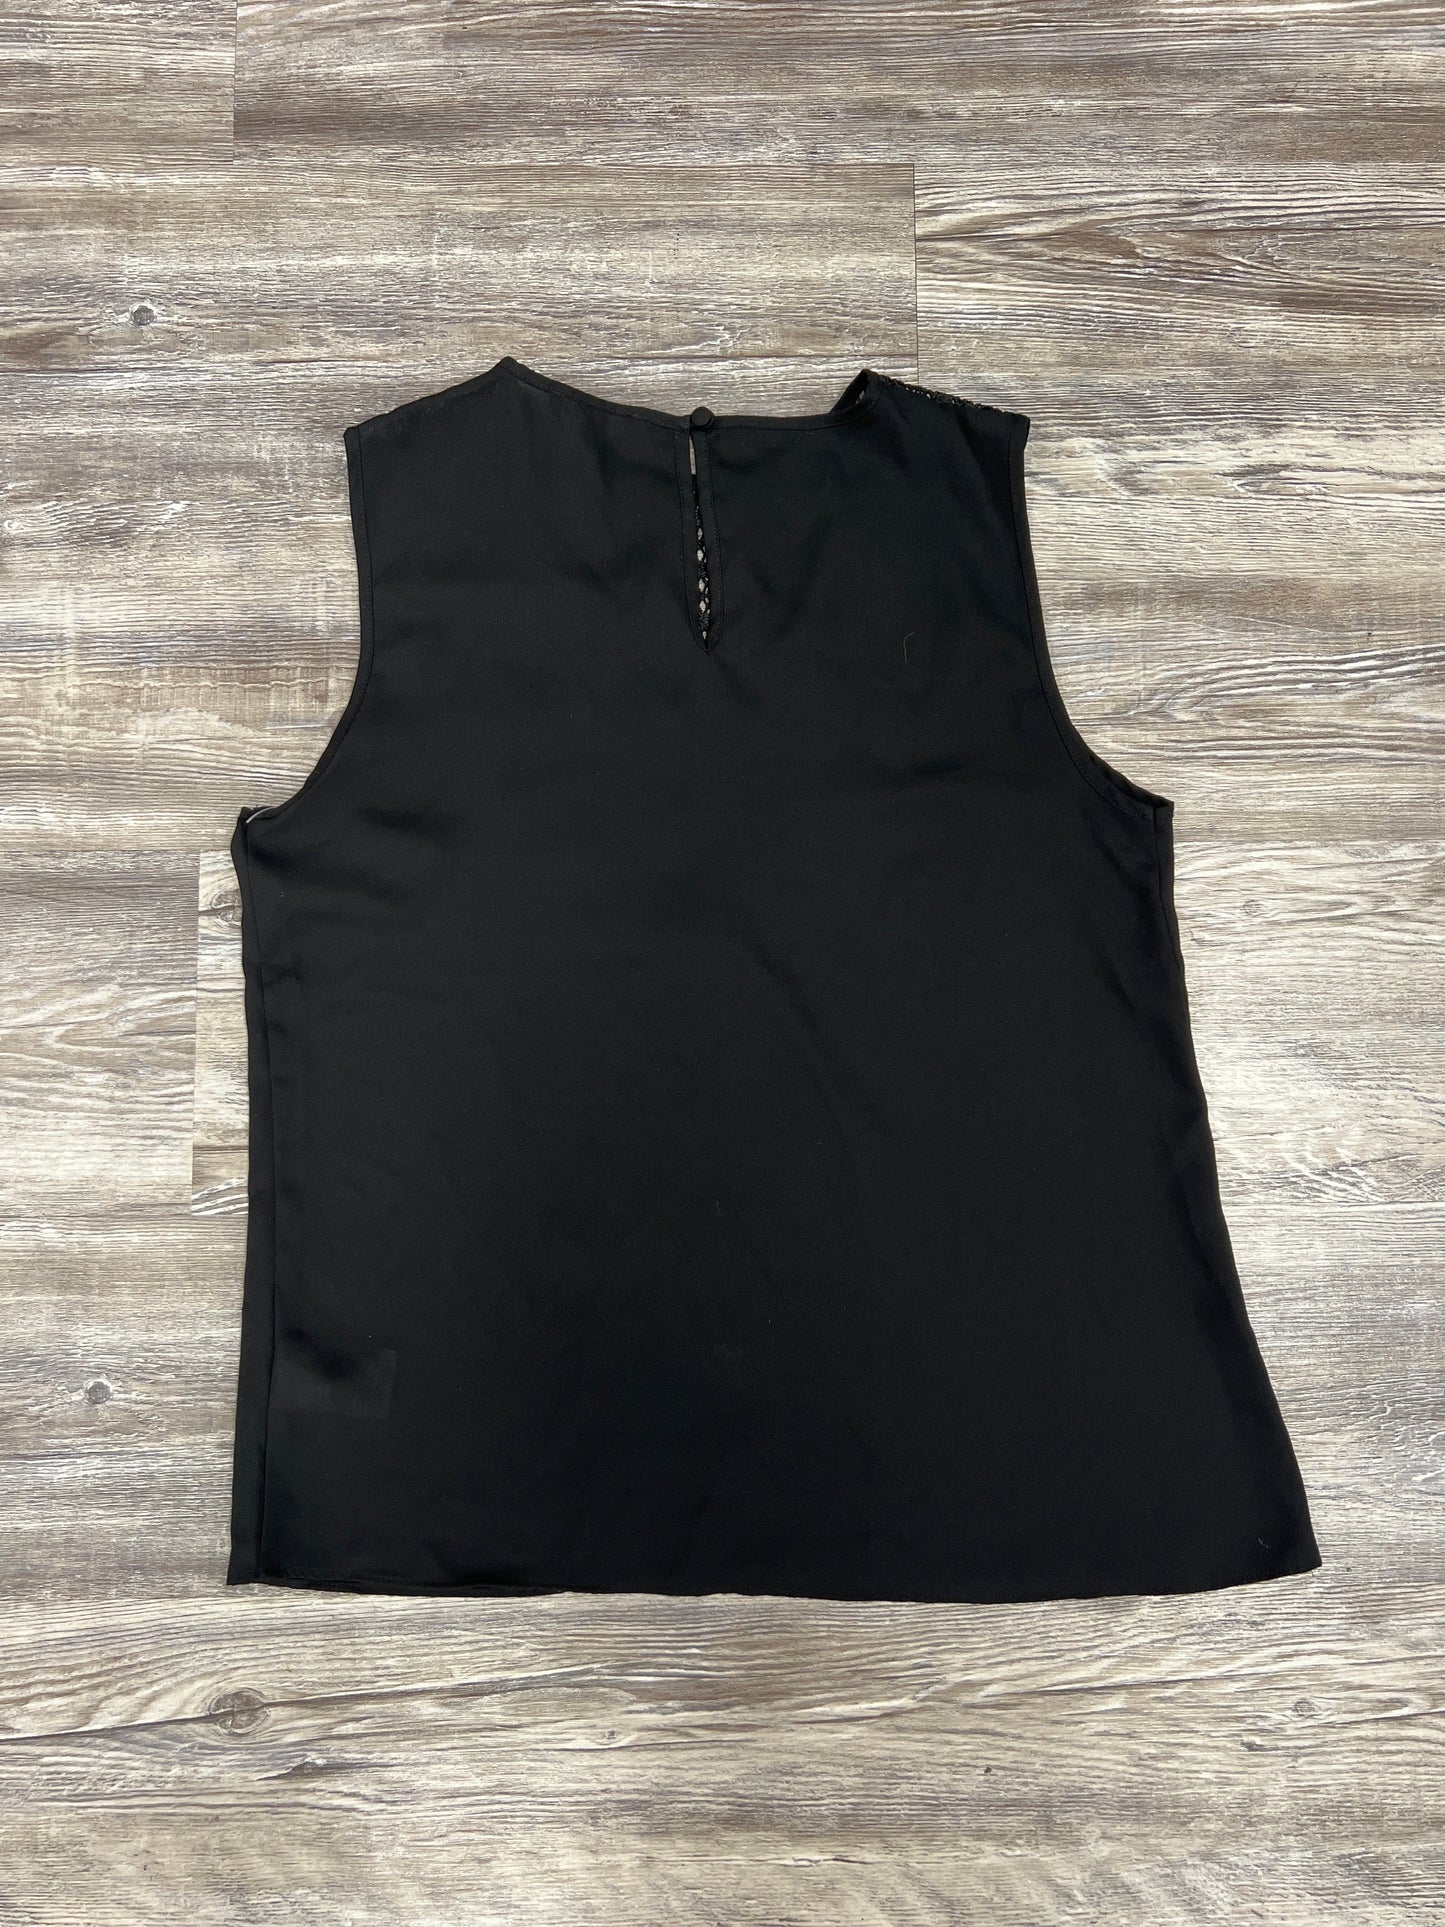 Top Sleeveless By Express Size: S